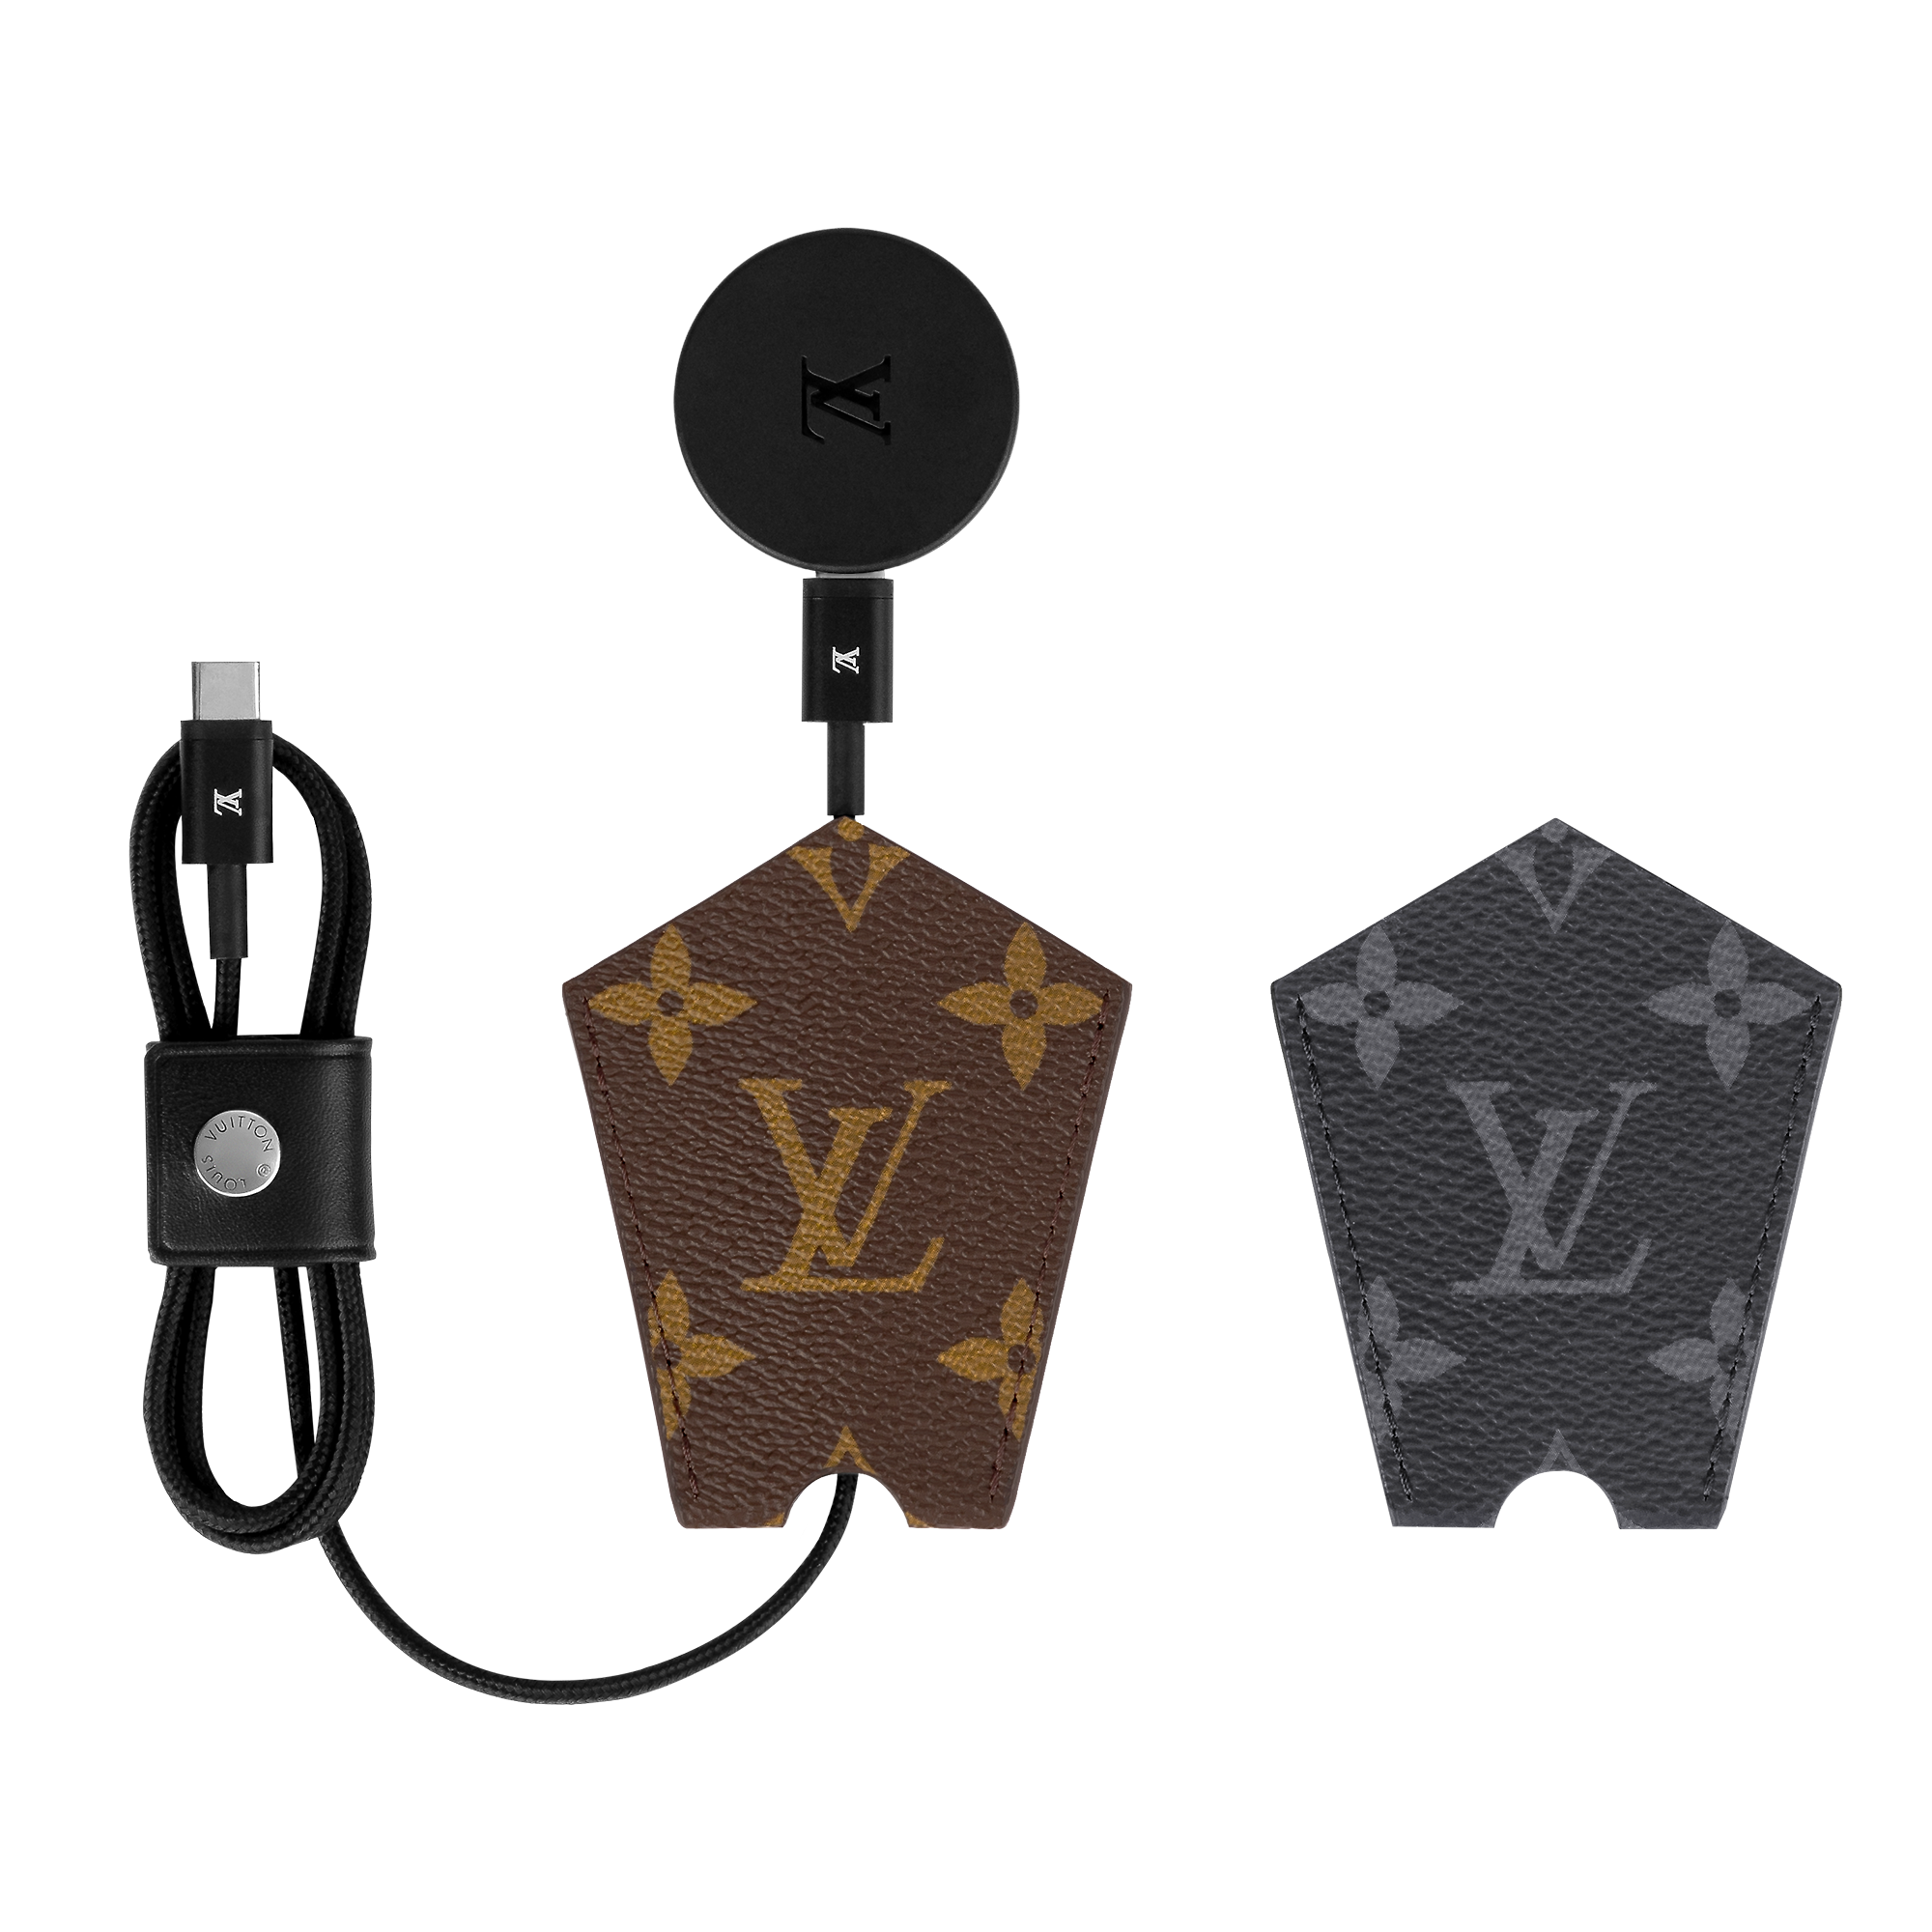 Louis Vuitton Charger For Tambour Horizon Light Up Connected Watches – Art of Living – Tech Objects and Accessories R17348